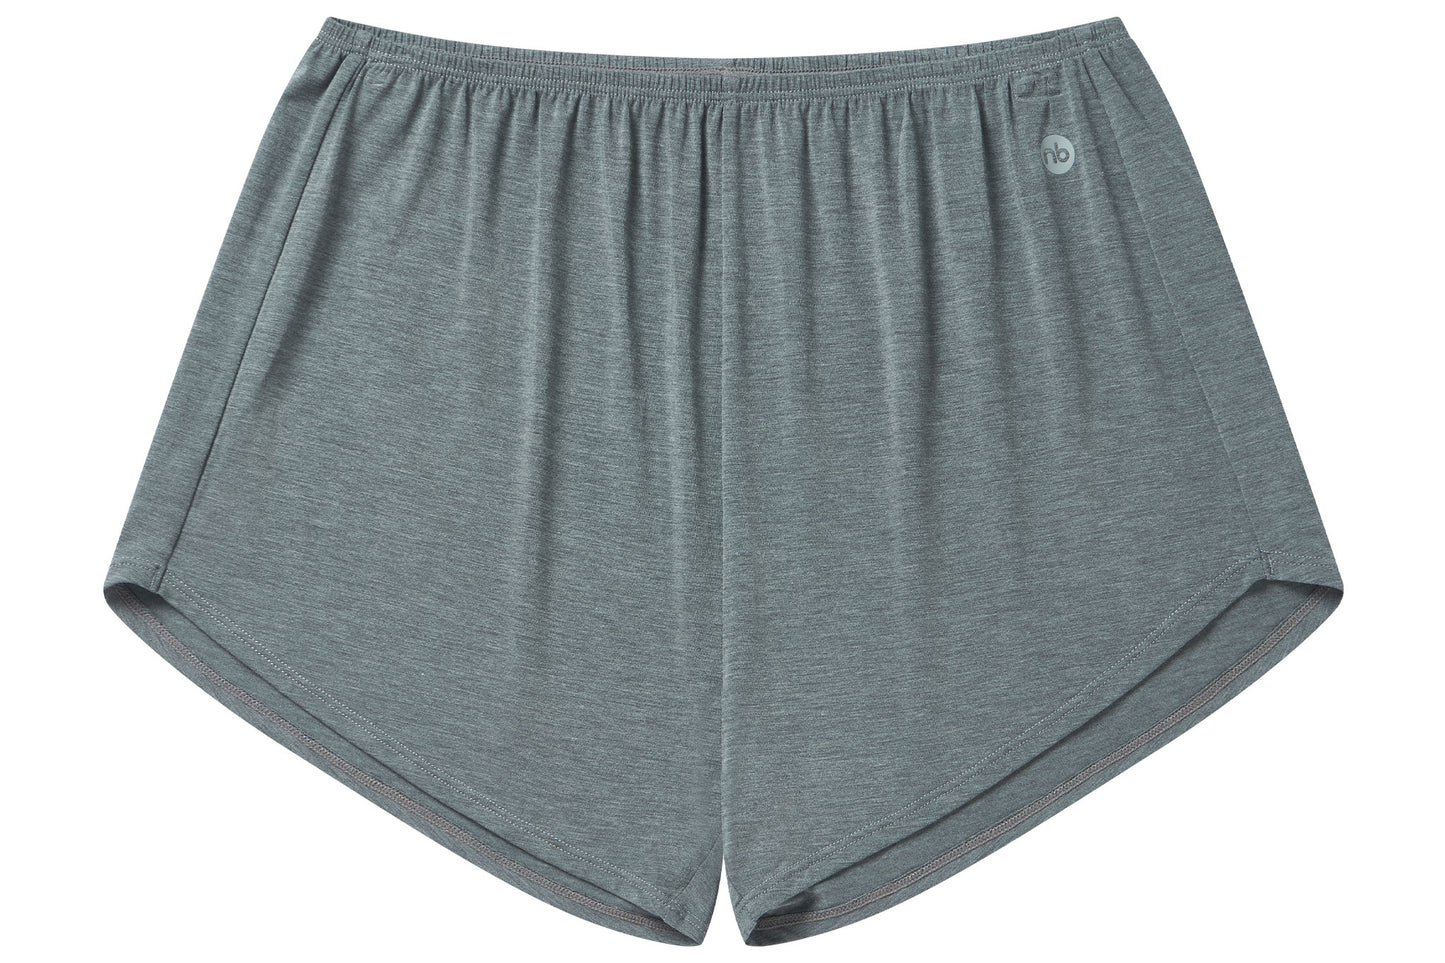 Women's Basics Boxer Briefs (Bamboo Spandex, 2 Pack) - Charcoal And Grey Dusk